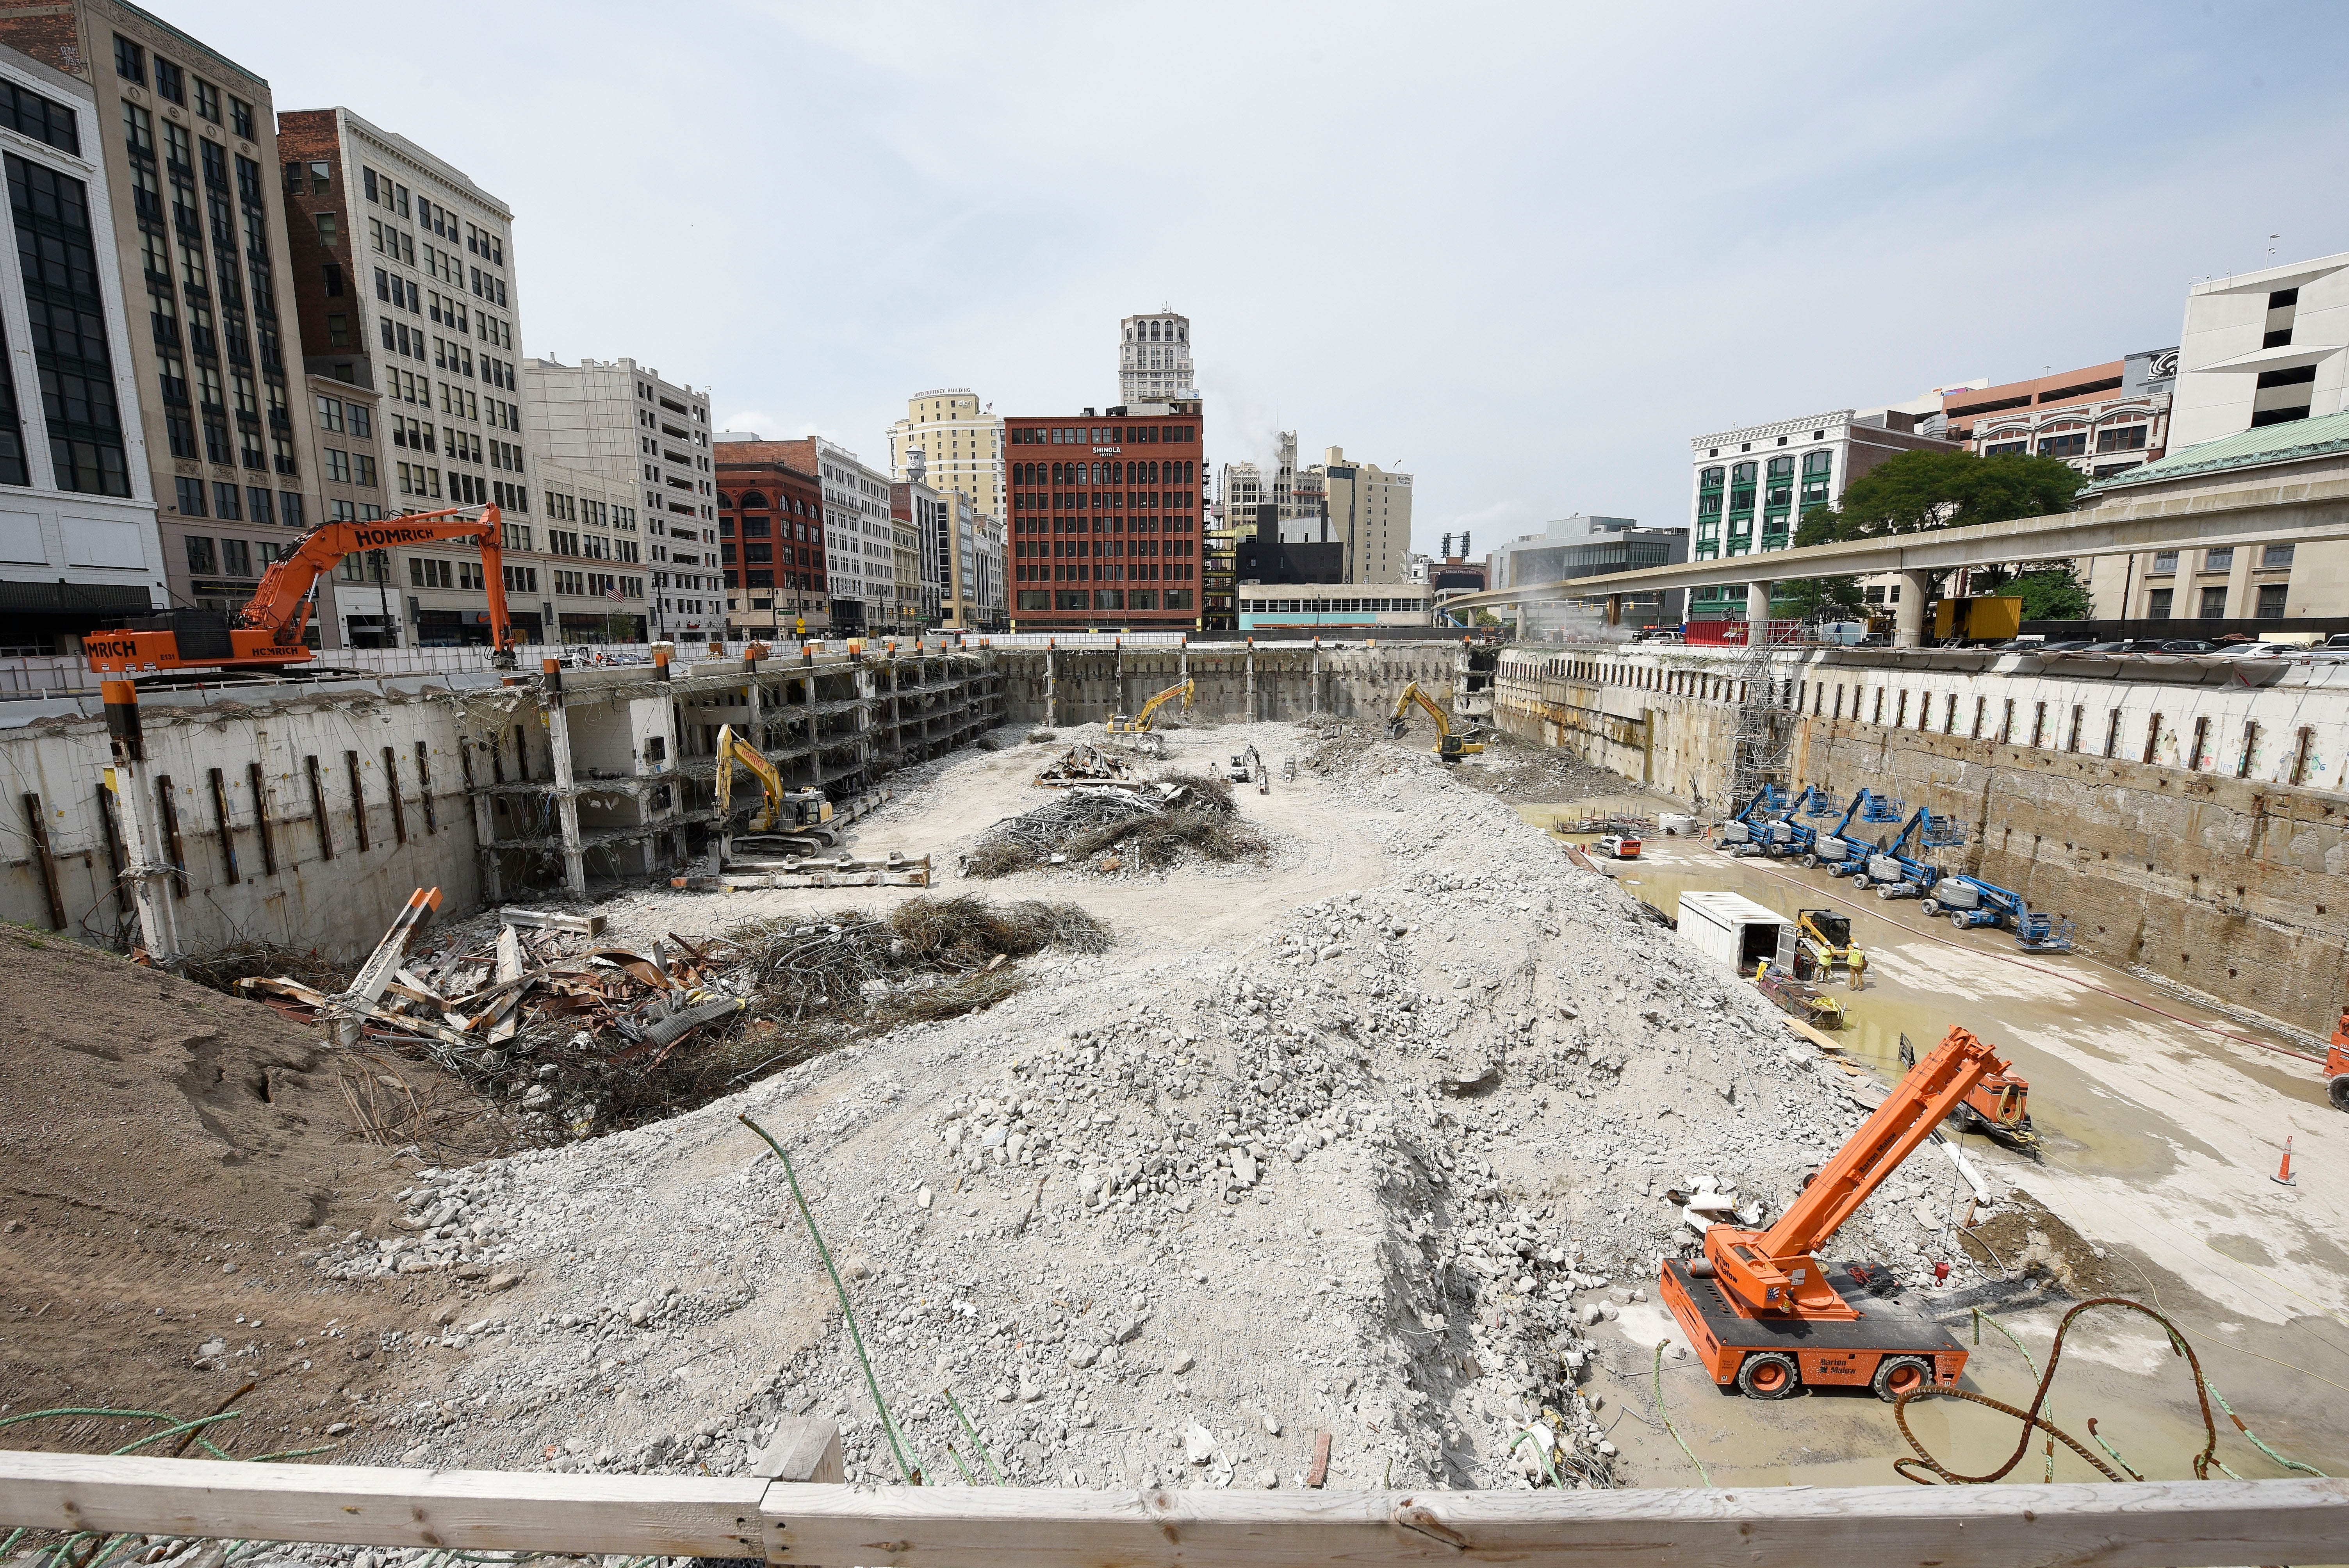 Work continues at the former Hudson's department store site on Woodward and Gratiot, where the tallest building in Detroit will be built.